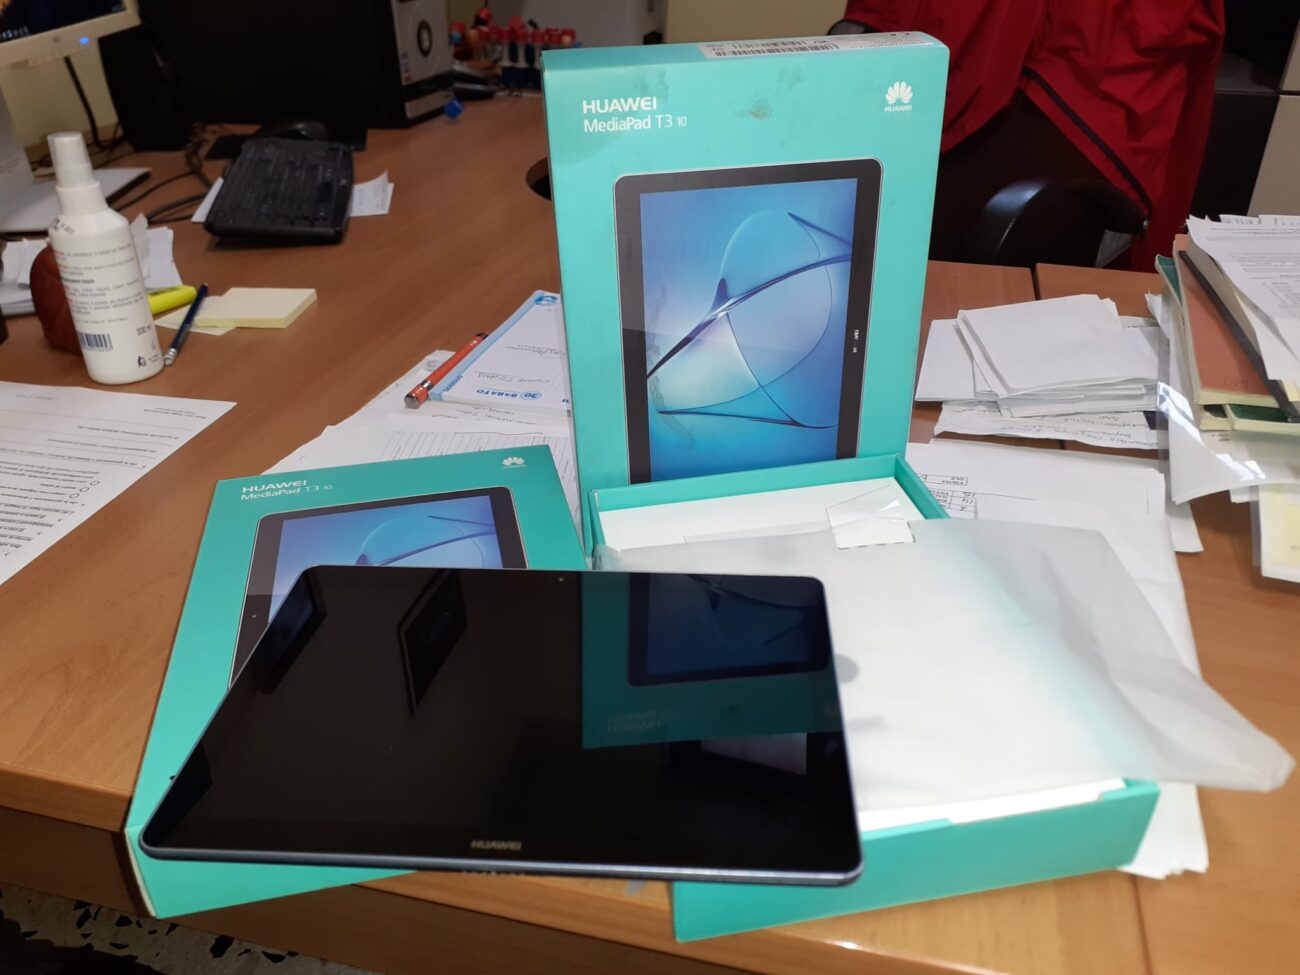 40 students at Salesian oratory in Palermo Italy receive tablets for learning, thanks to donor support